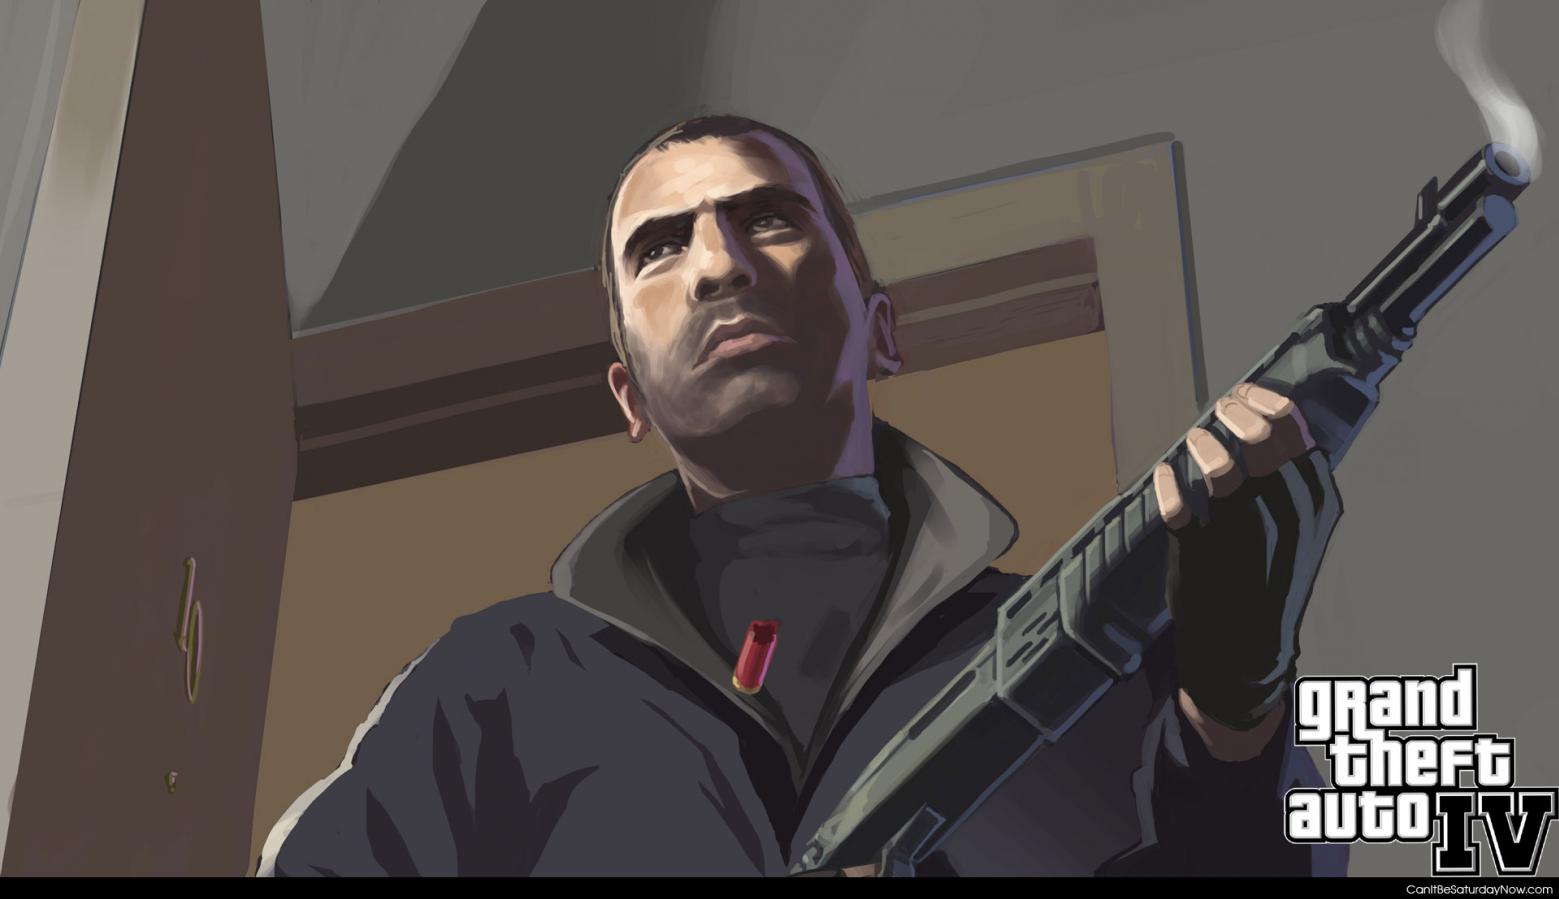 Gta4 loading screen - one of the loading screens from GTA4